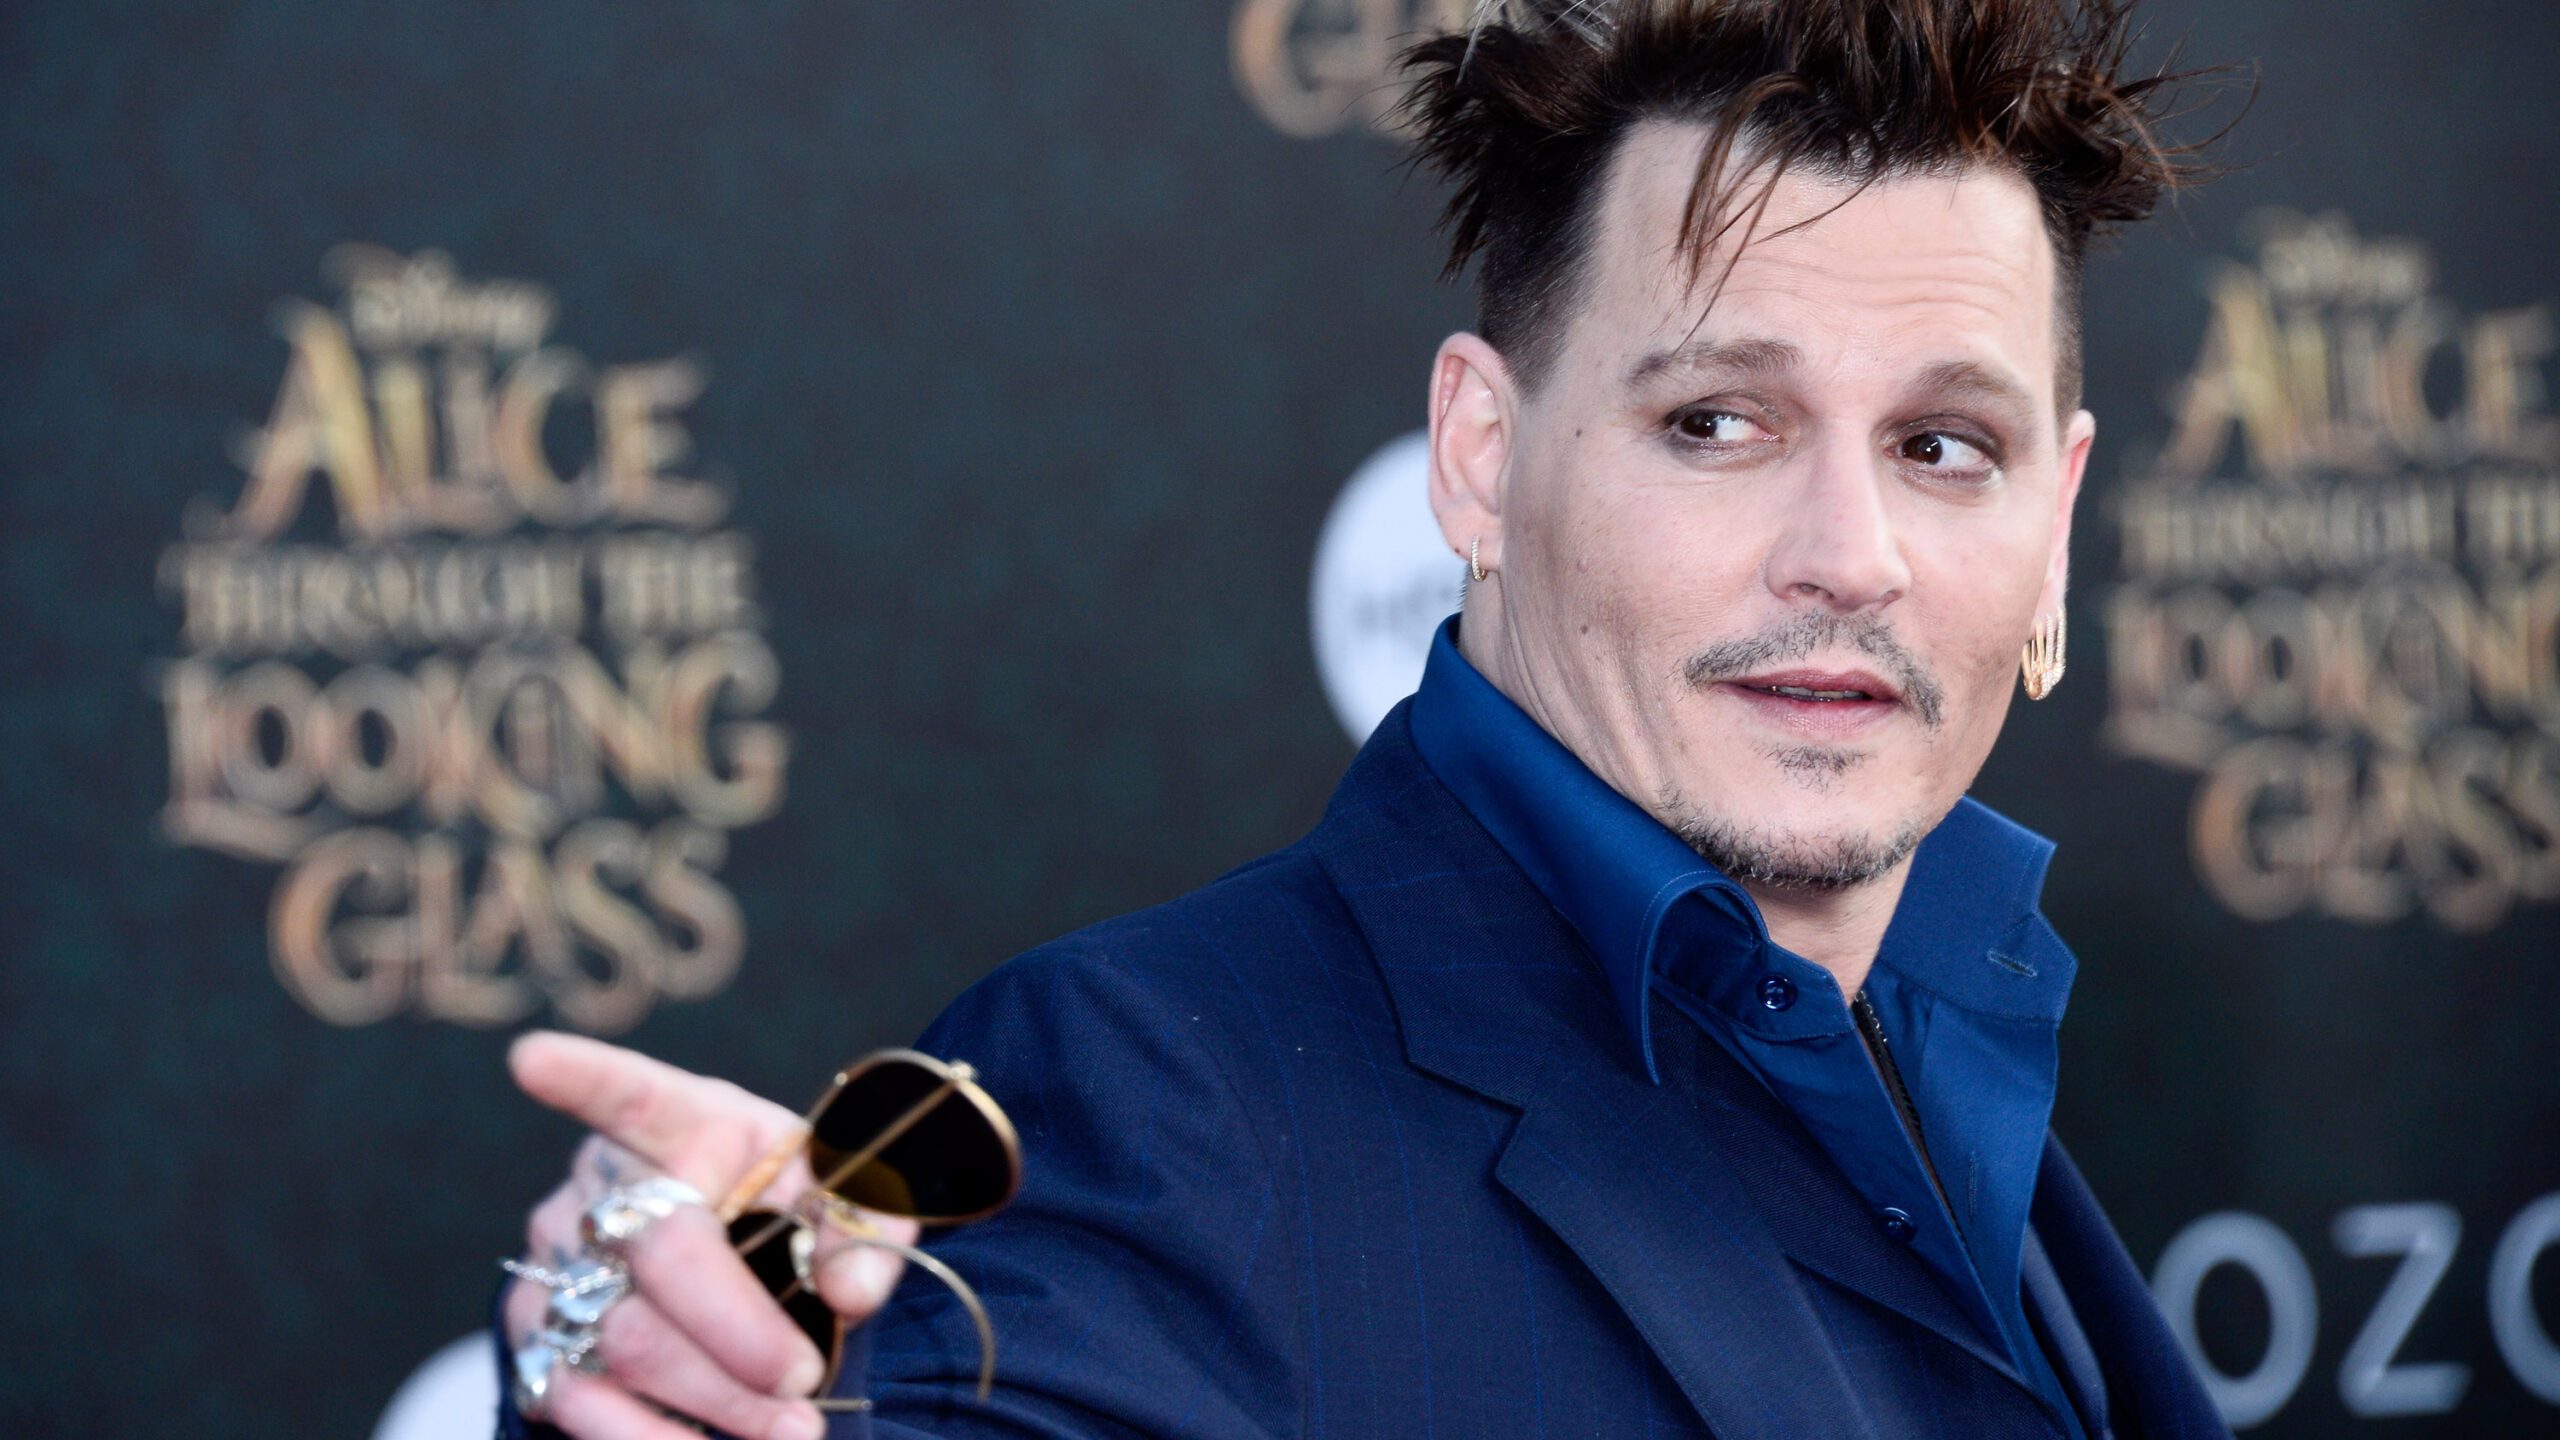 Johnny Depp and Australia minister renew war of words